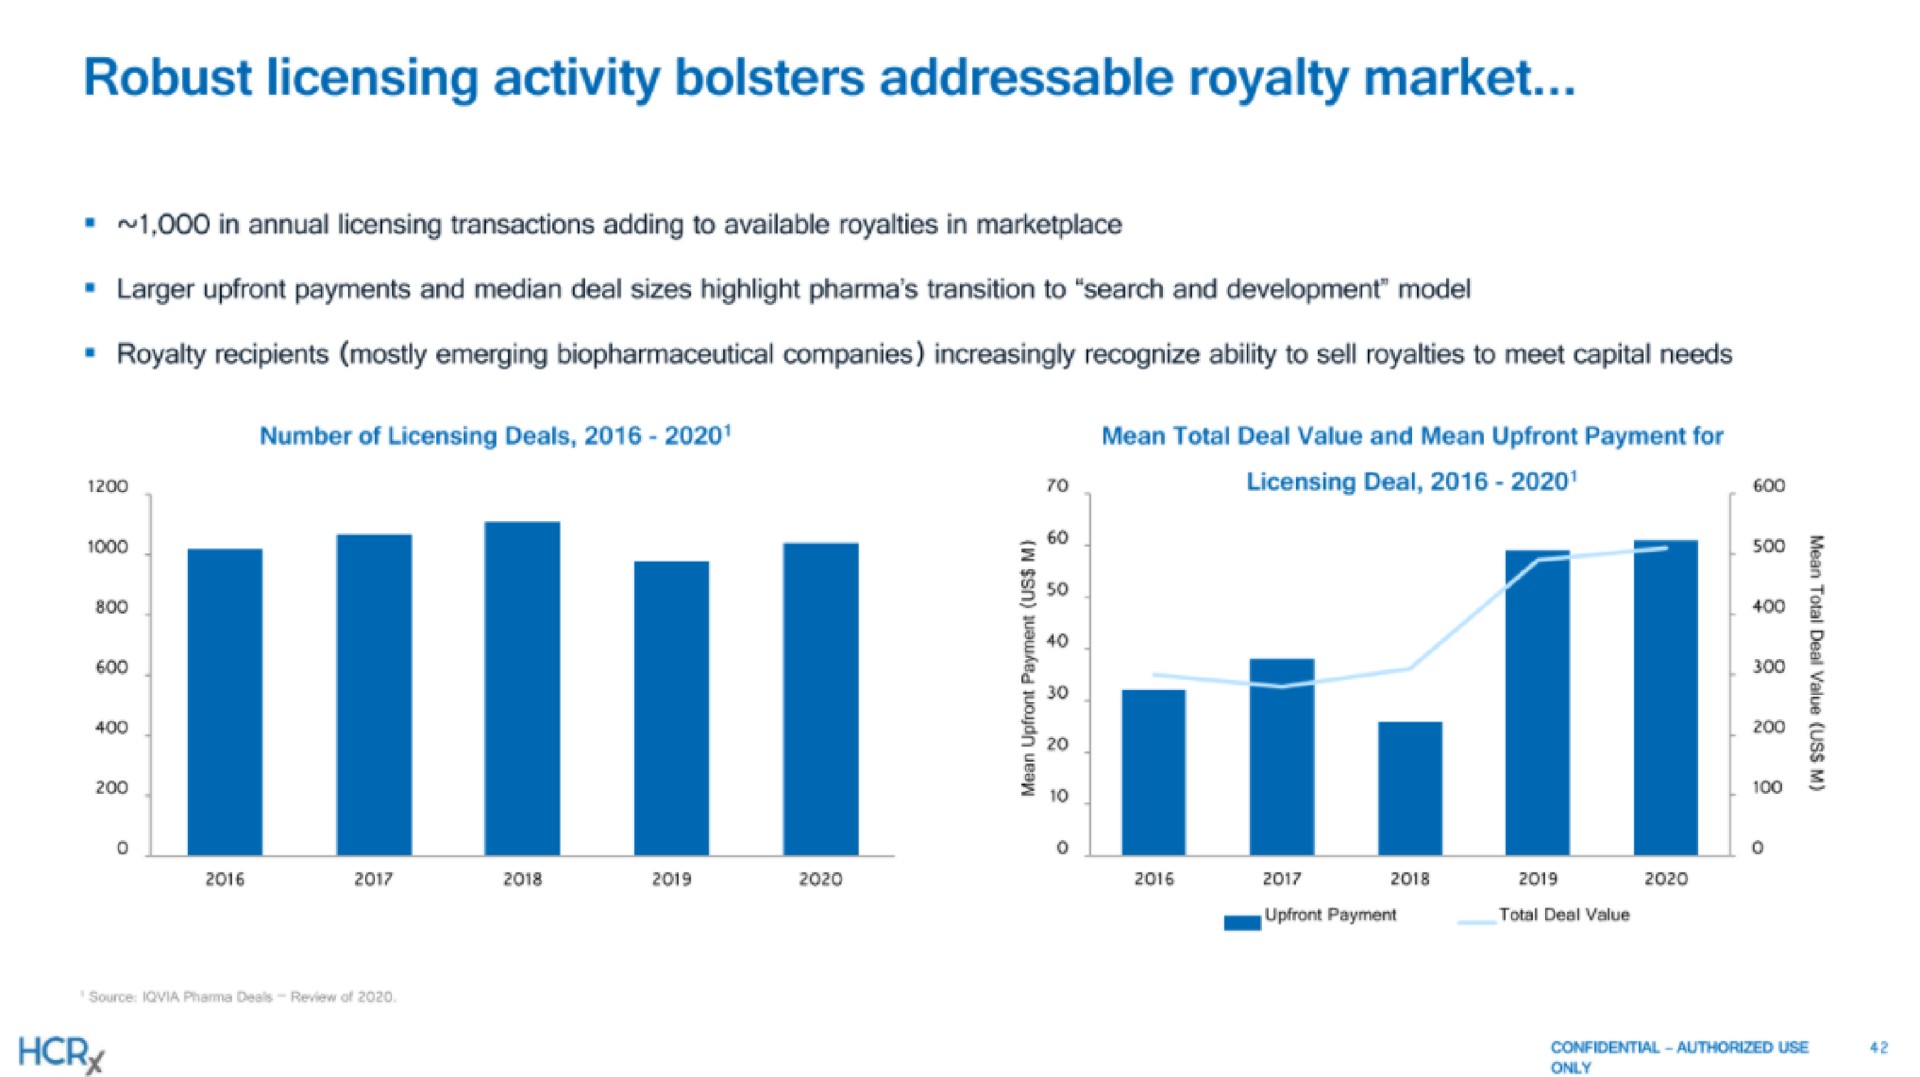 robust licensing activity bolsters royalty market | Healthcare Royalty